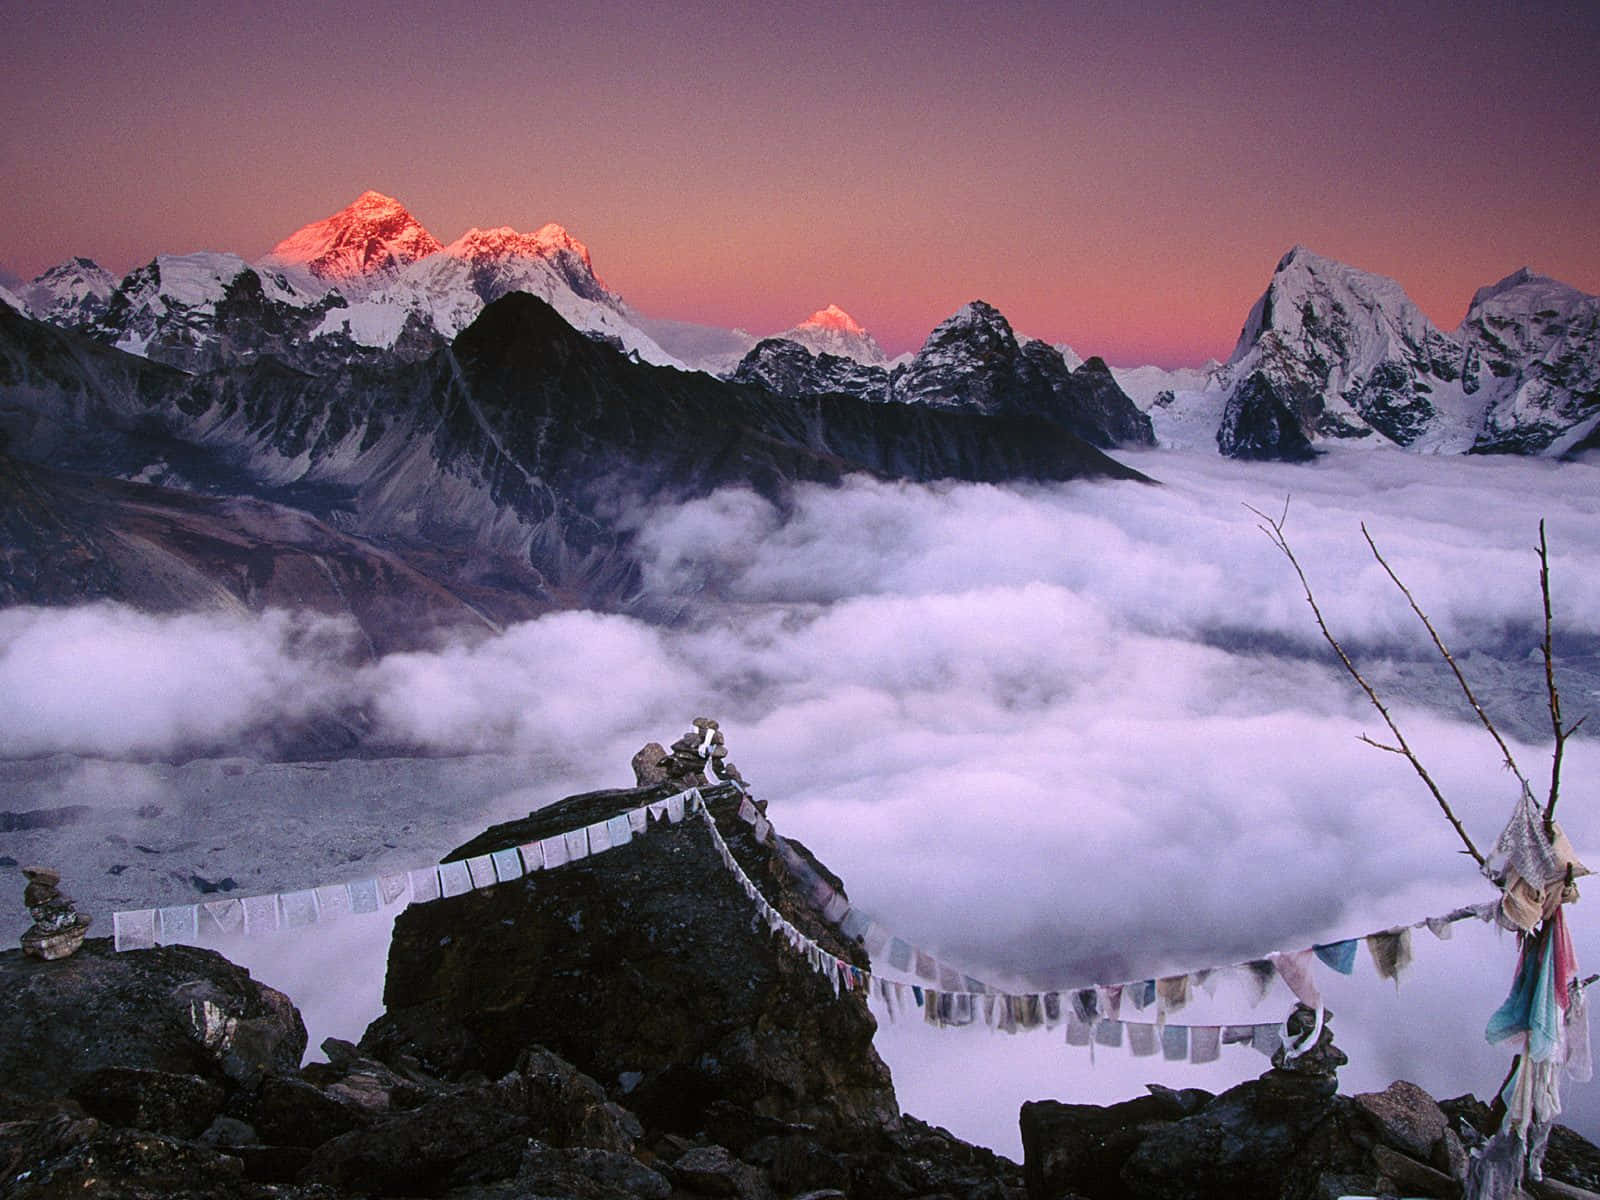 Towering over the Himalayas, Mount Everest stands tall